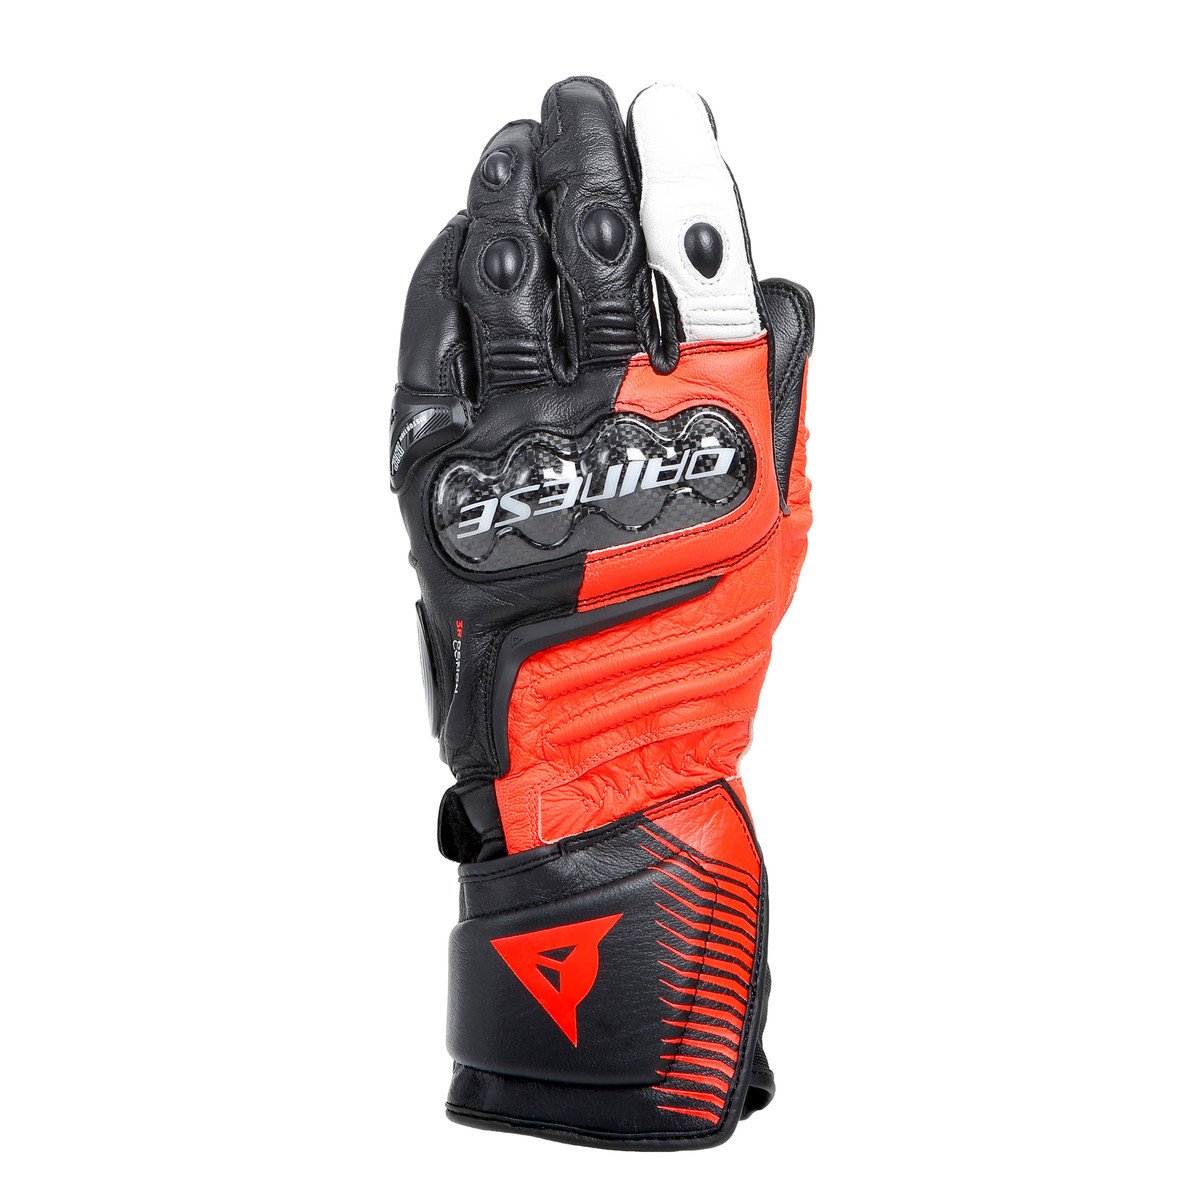 Image of Dainese Carbon 4 Long Black Fluo Red White Size S ID 8051019425959